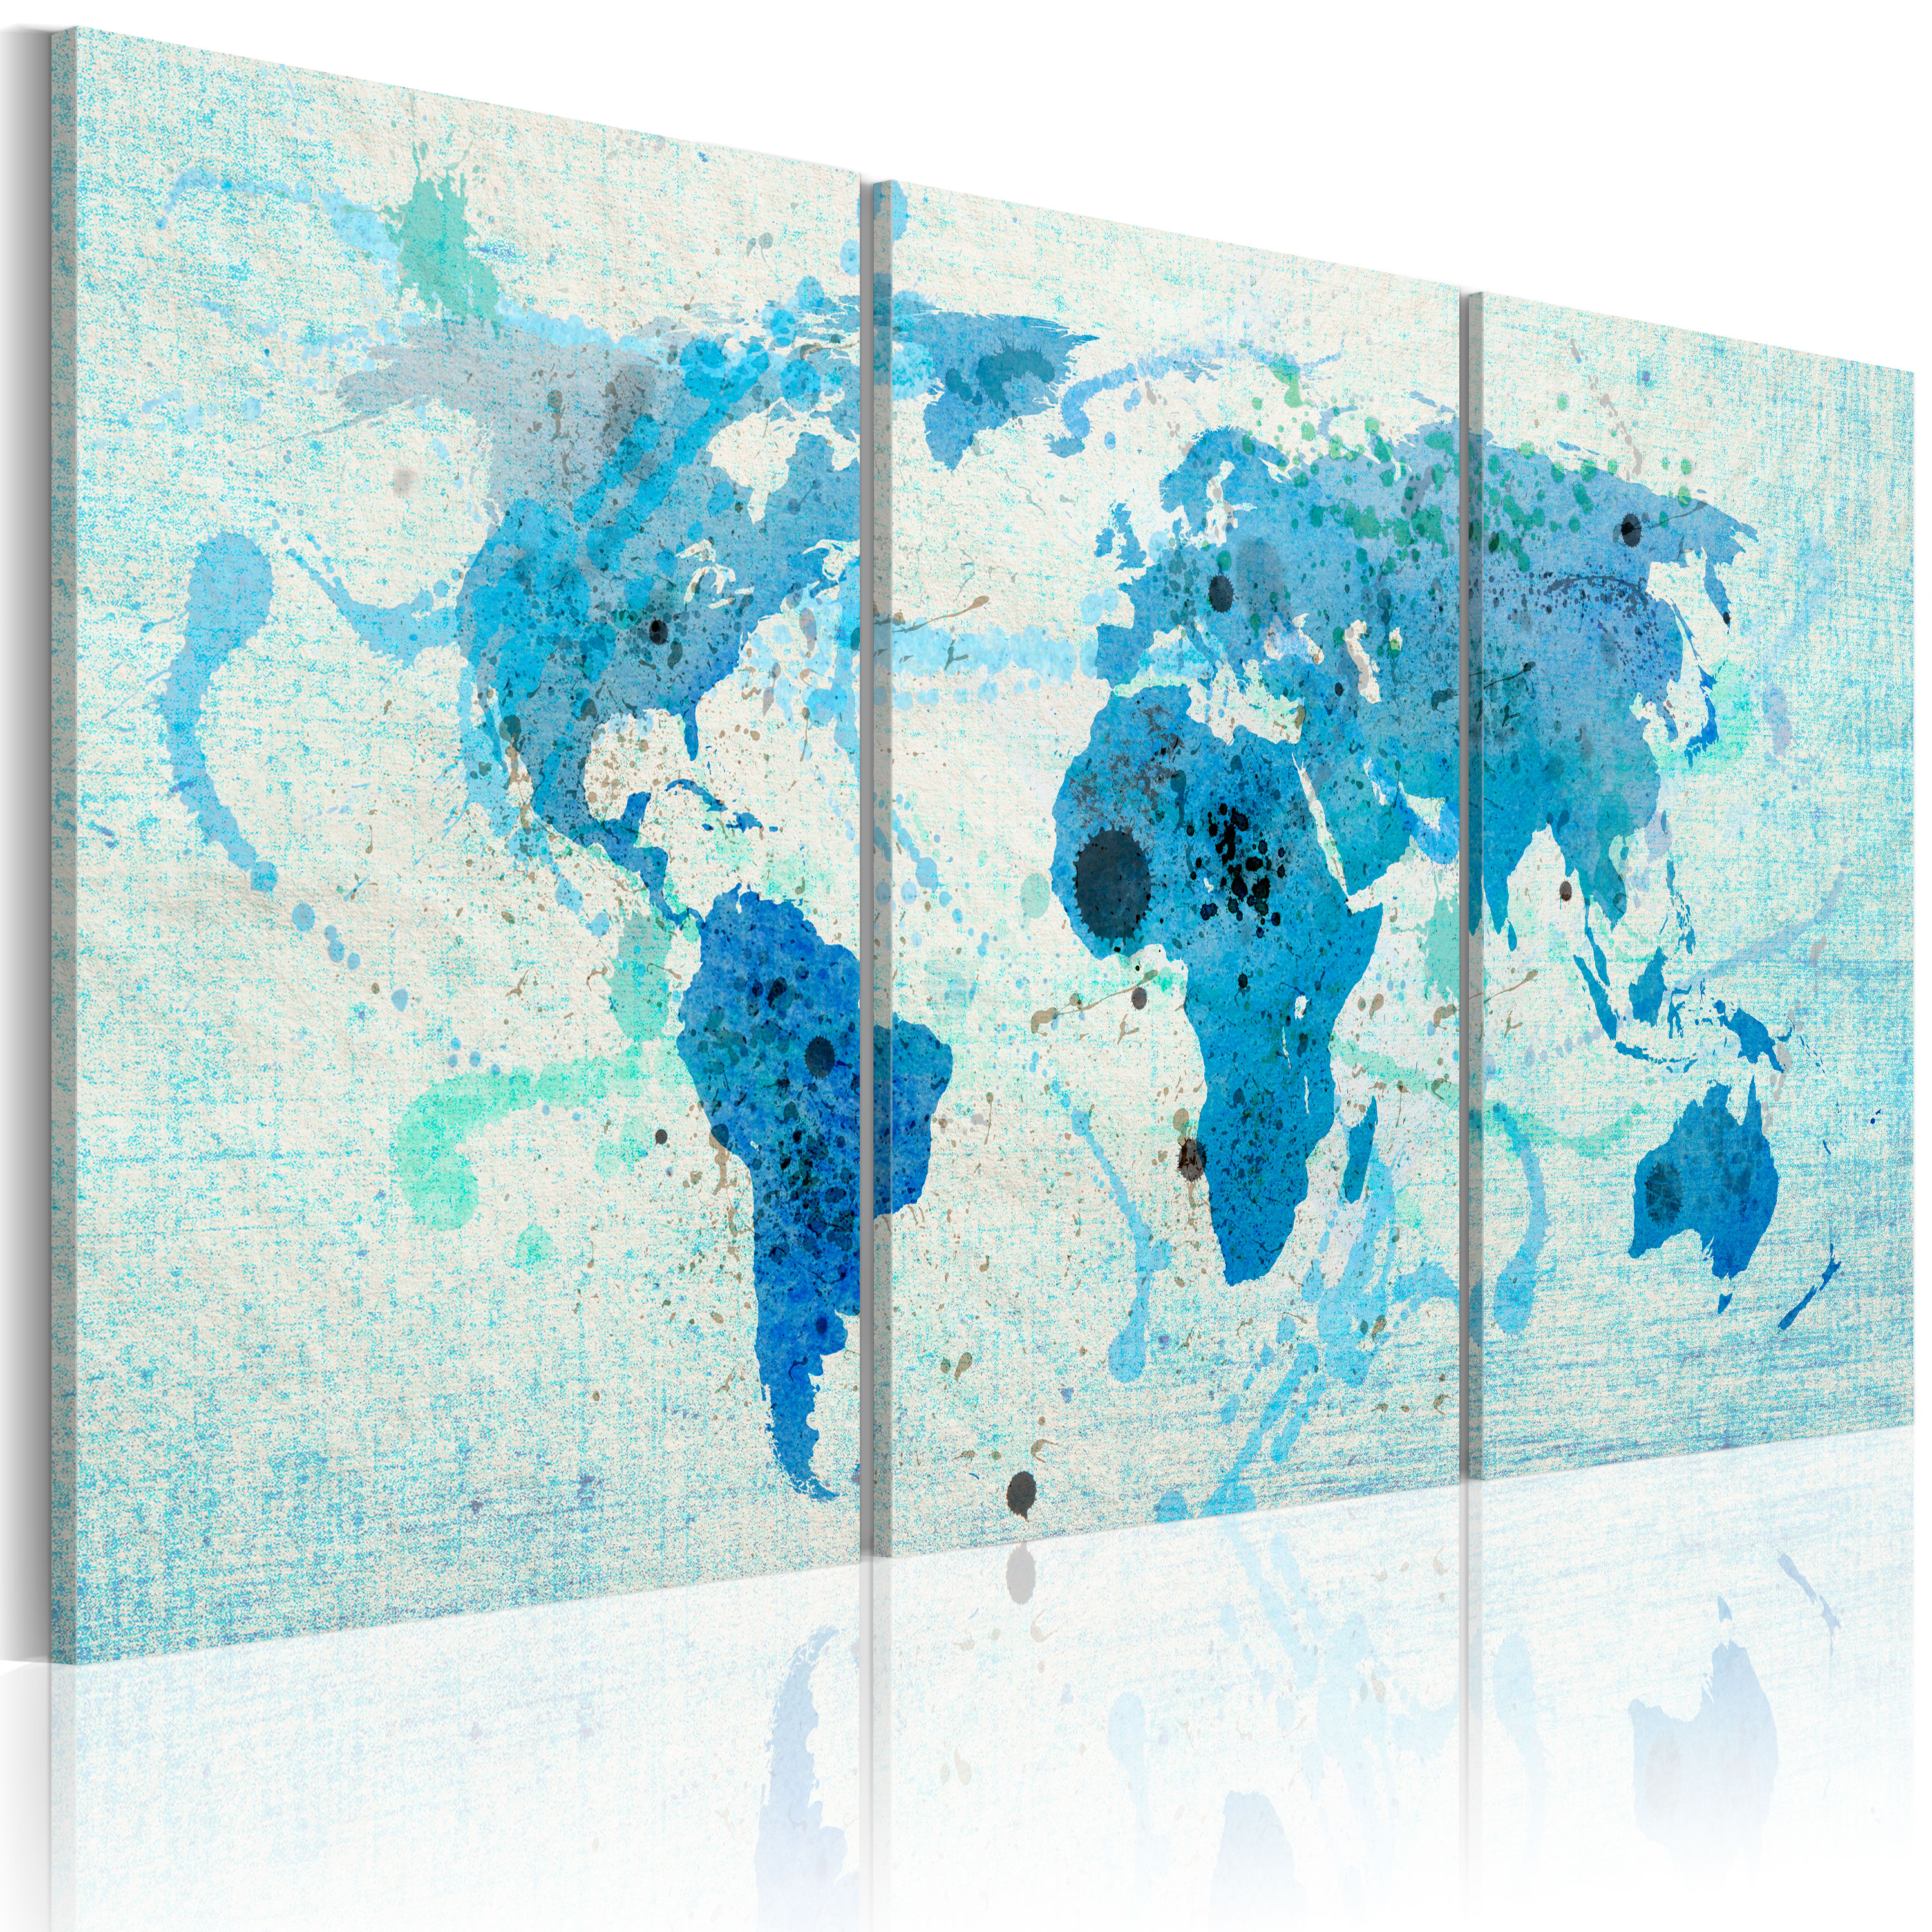 Canvas Print - Continents like oceans - 60x30